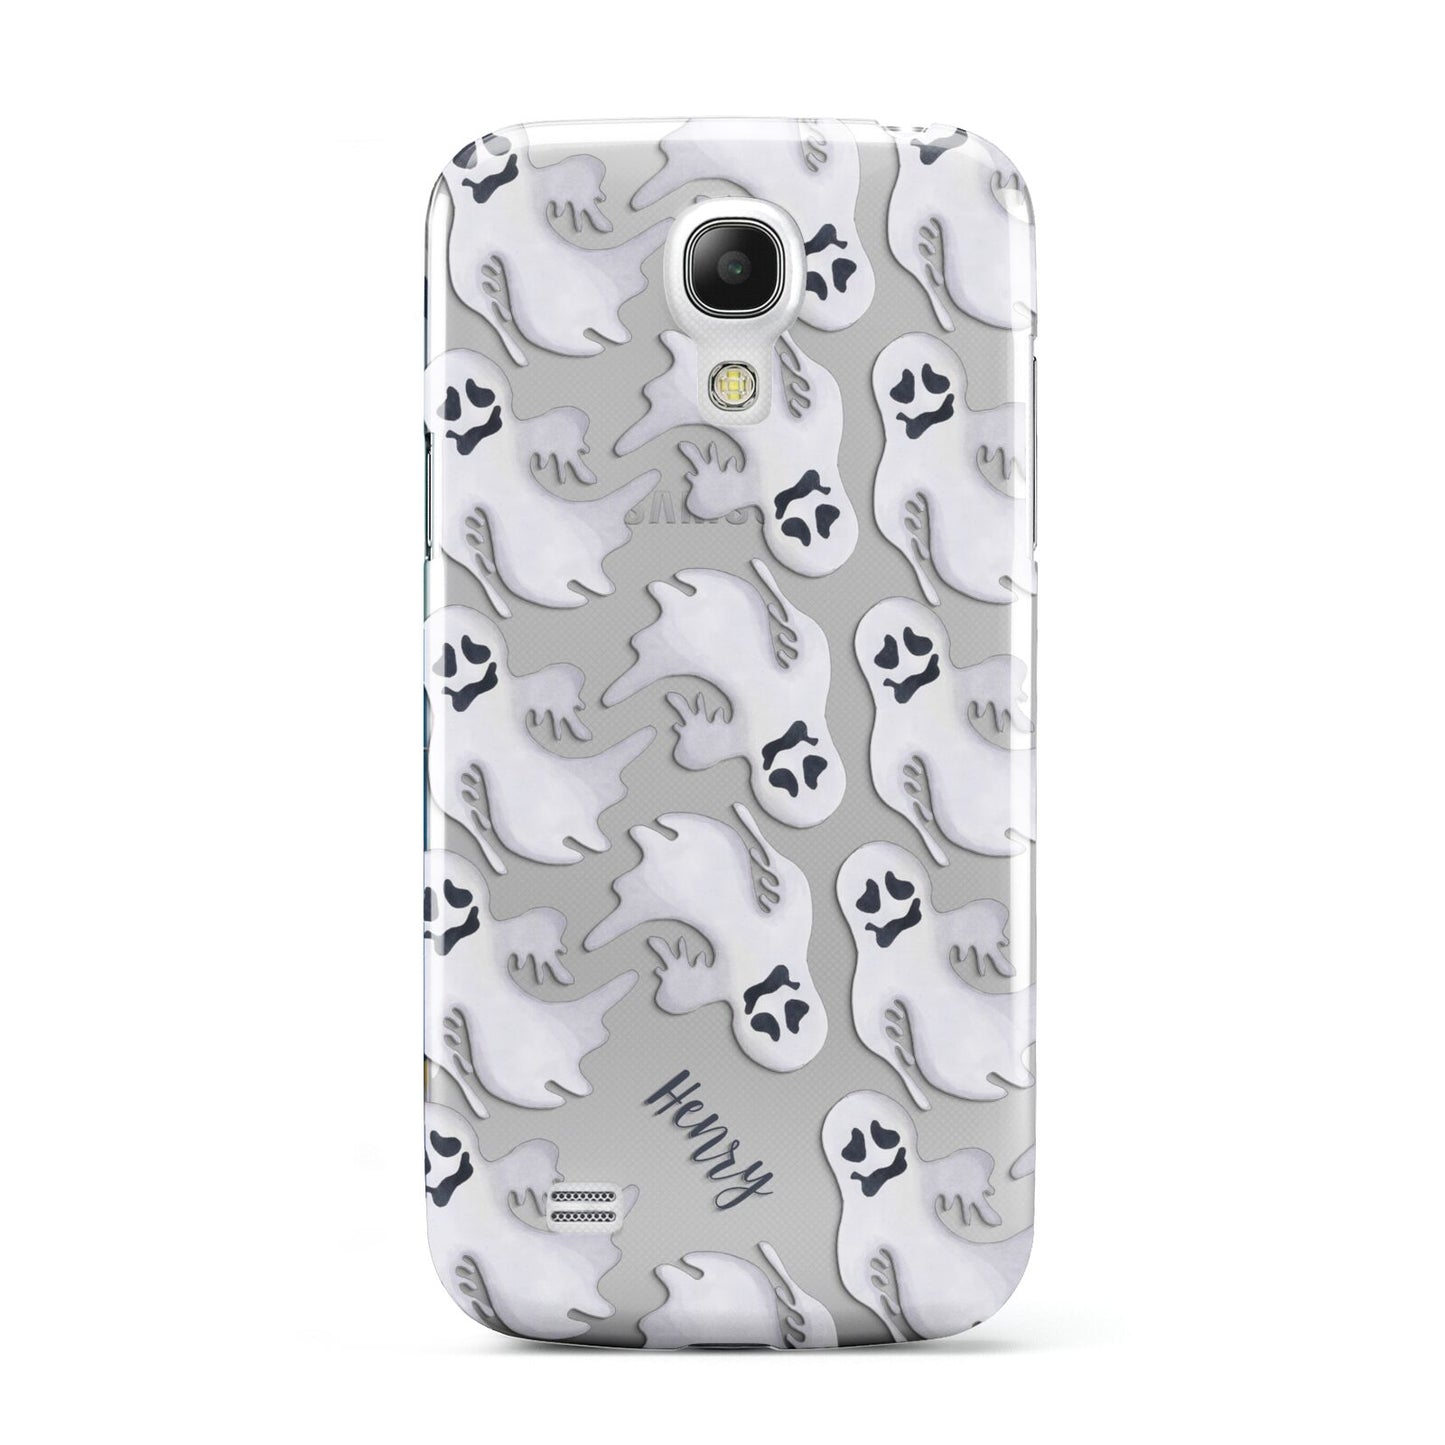 Floaty Ghosts Personalised Samsung Galaxy S4 Mini Case